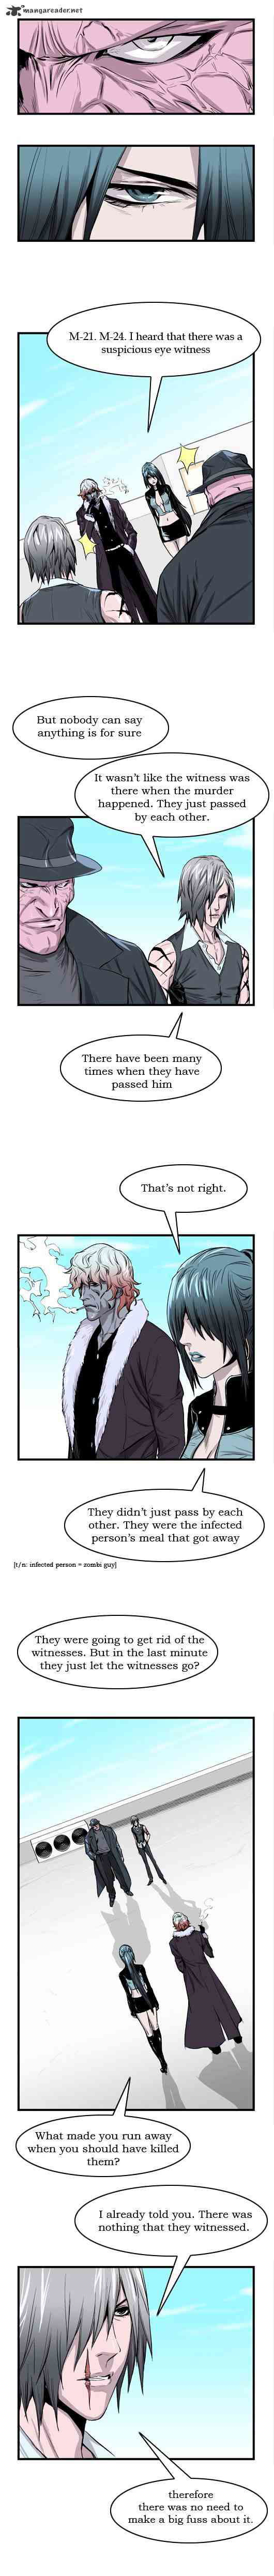 Noblesse Chapter 31 _ Chapters 31-45 page 63